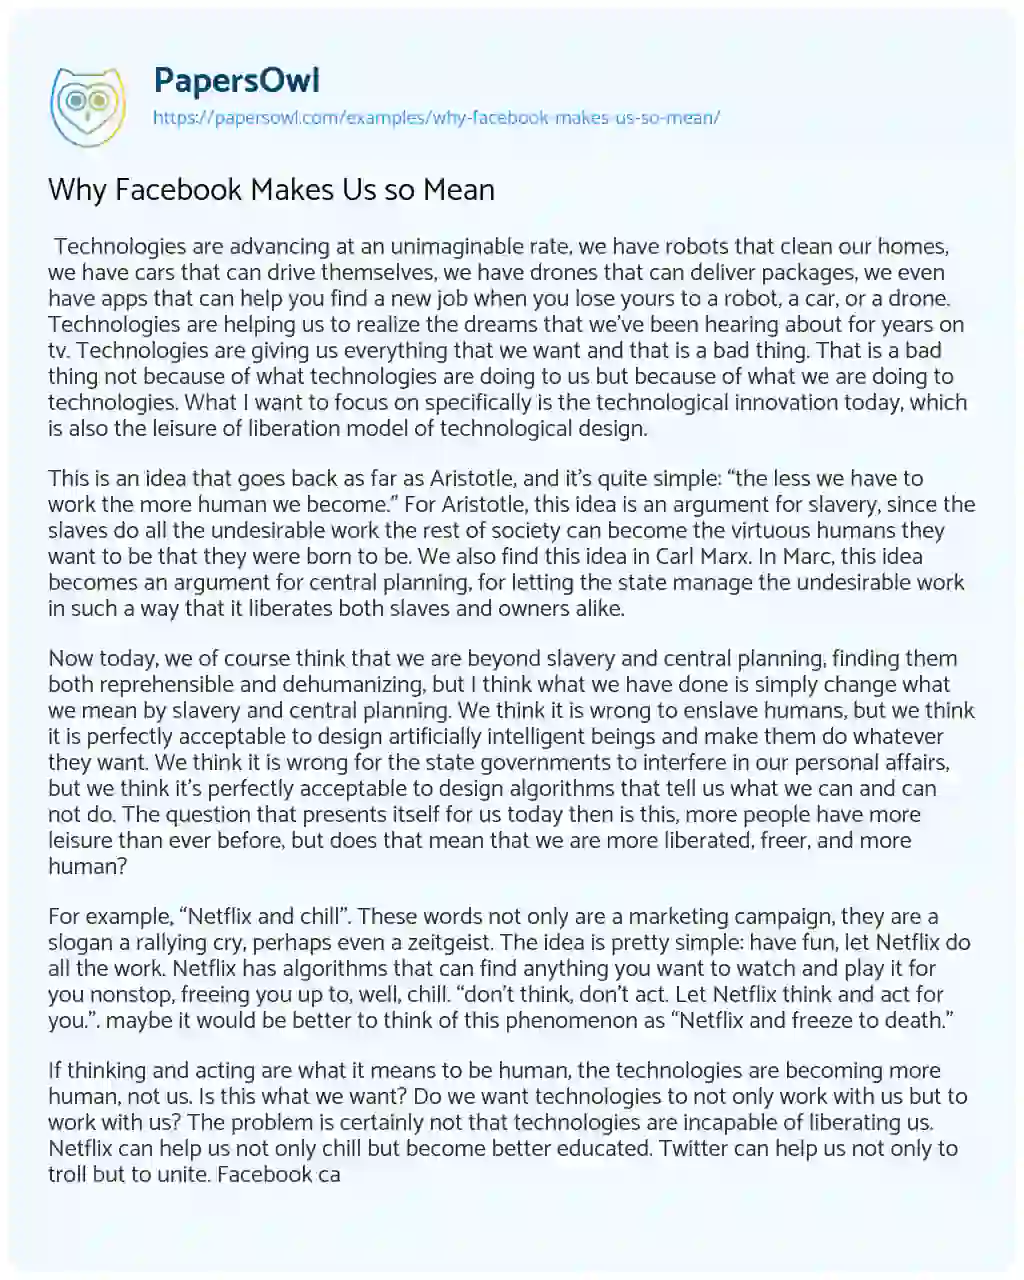 Essay on Why Facebook Makes Us so Mean 